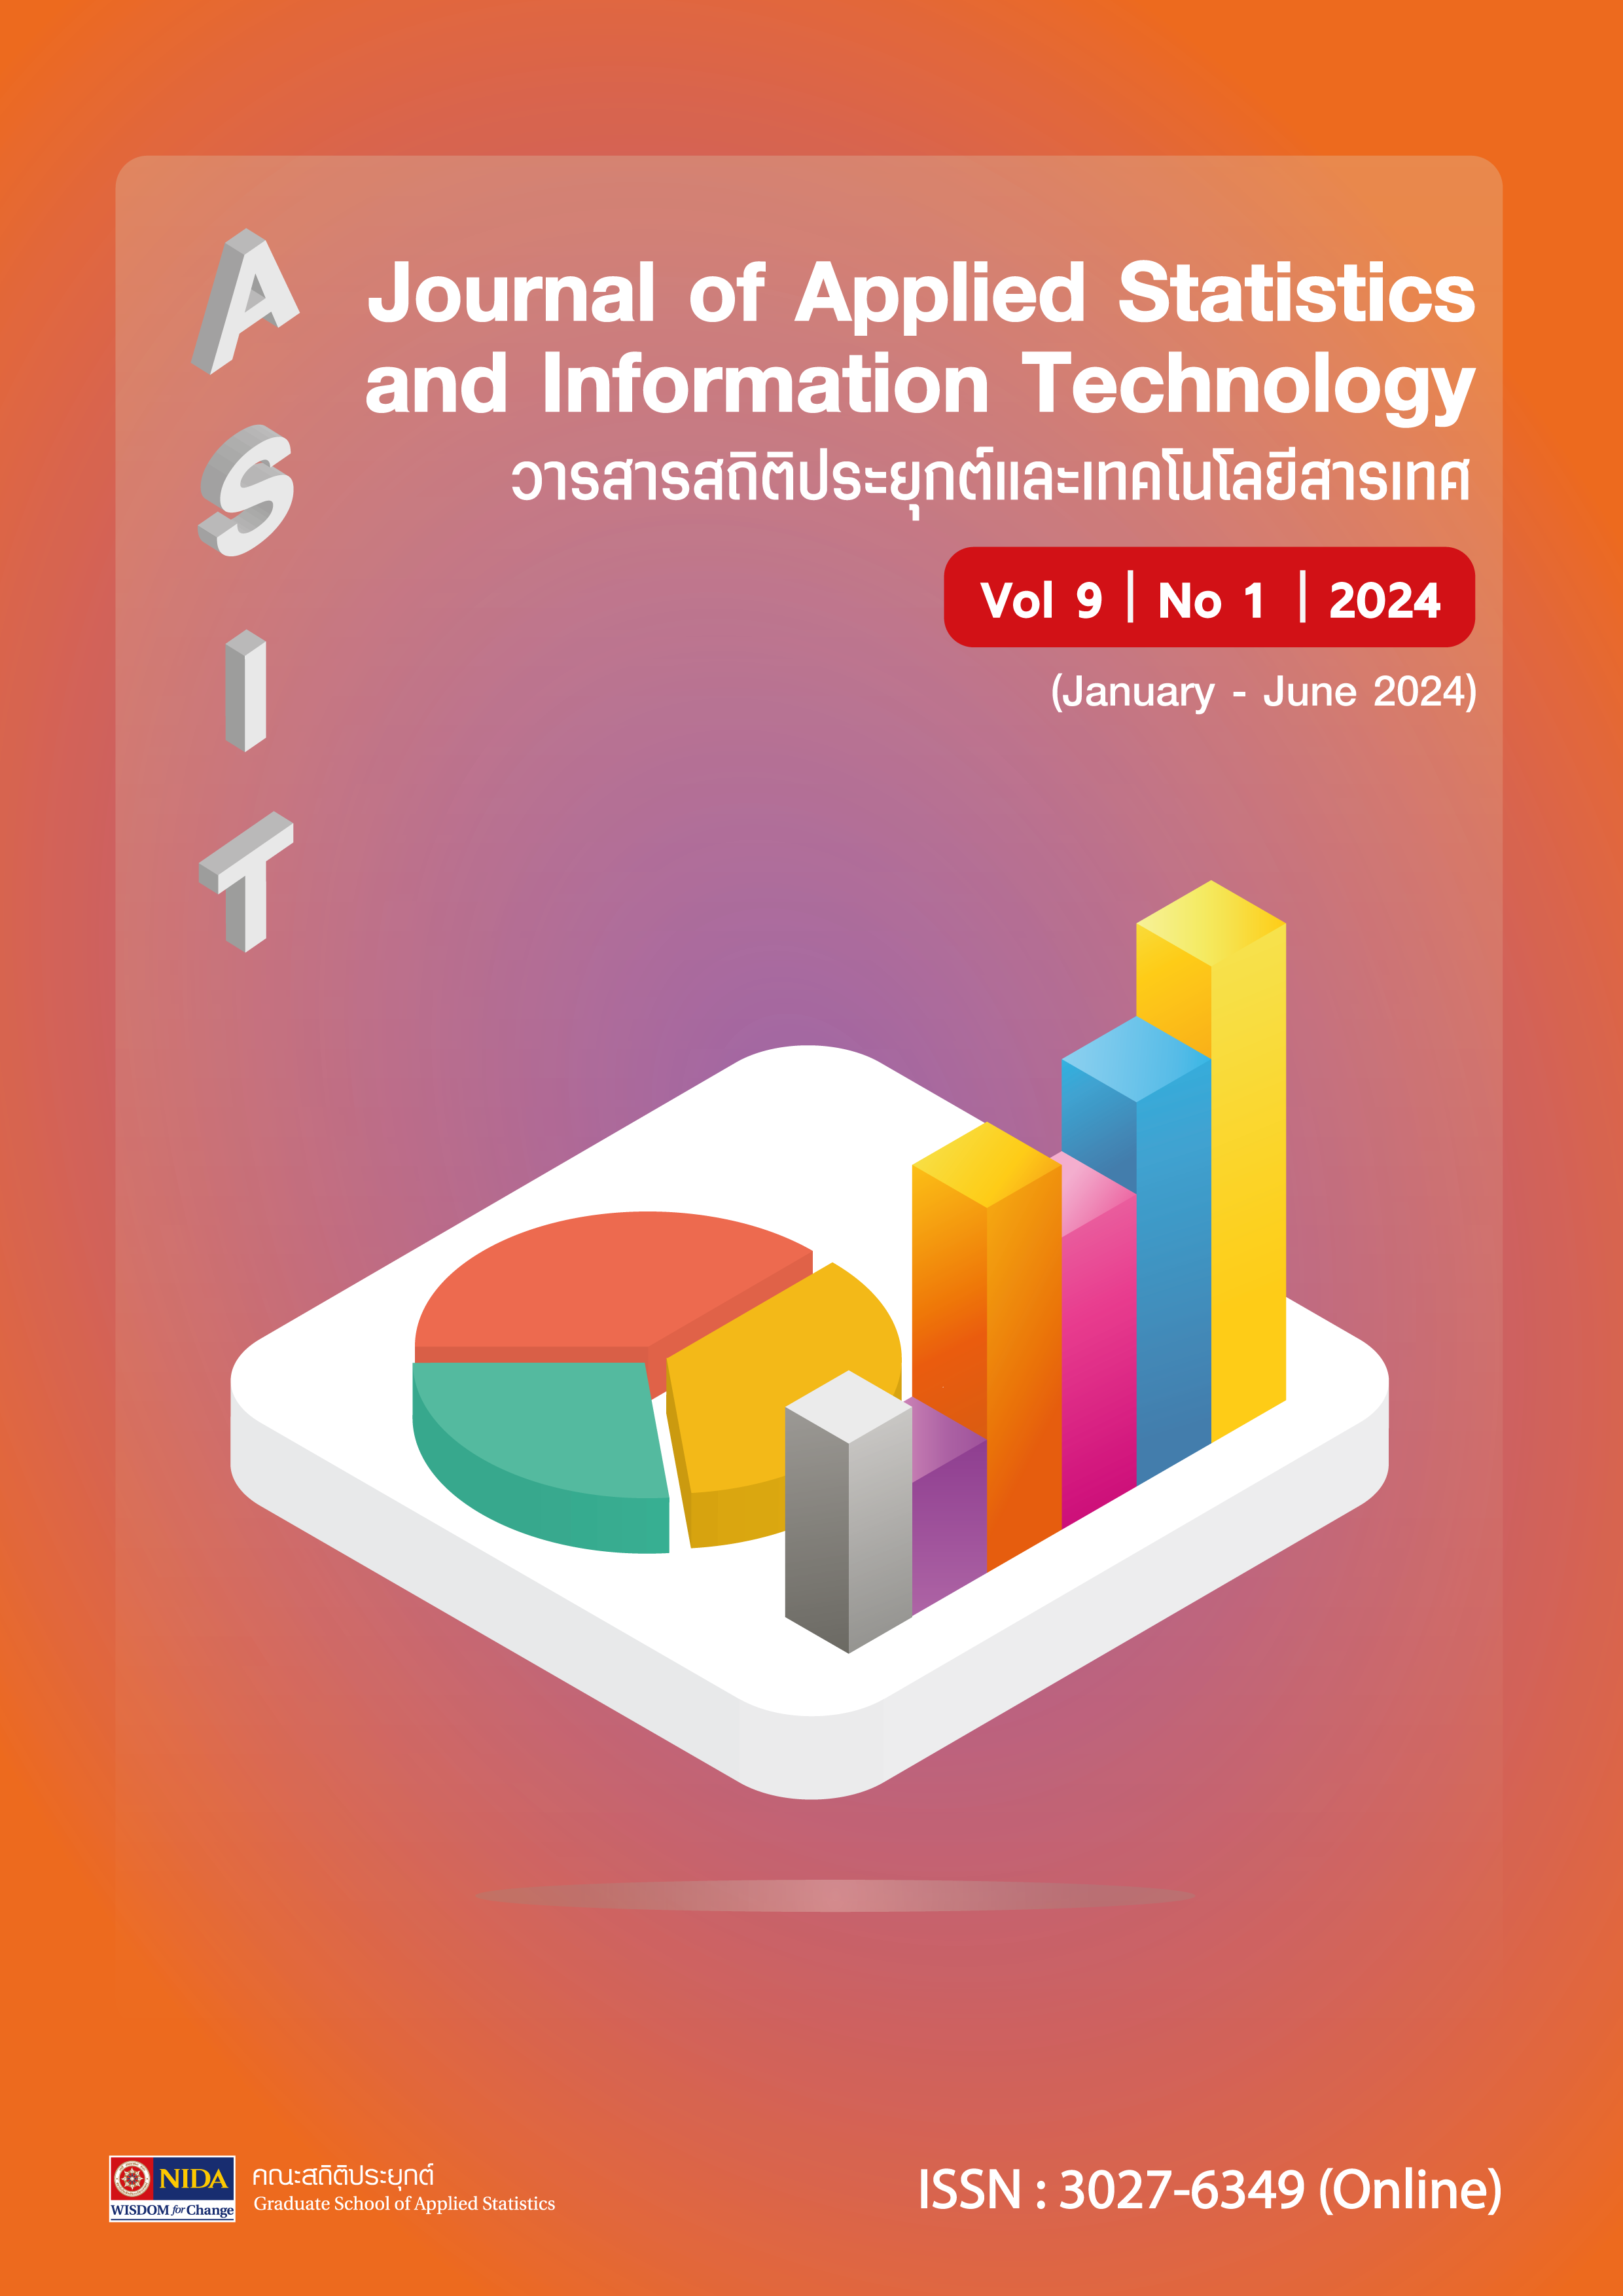 					View Vol. 9 No. 1 (2024): Journal of Applied Statistics and Information Technology Vol 9 No 1 (January - June 2024)
				